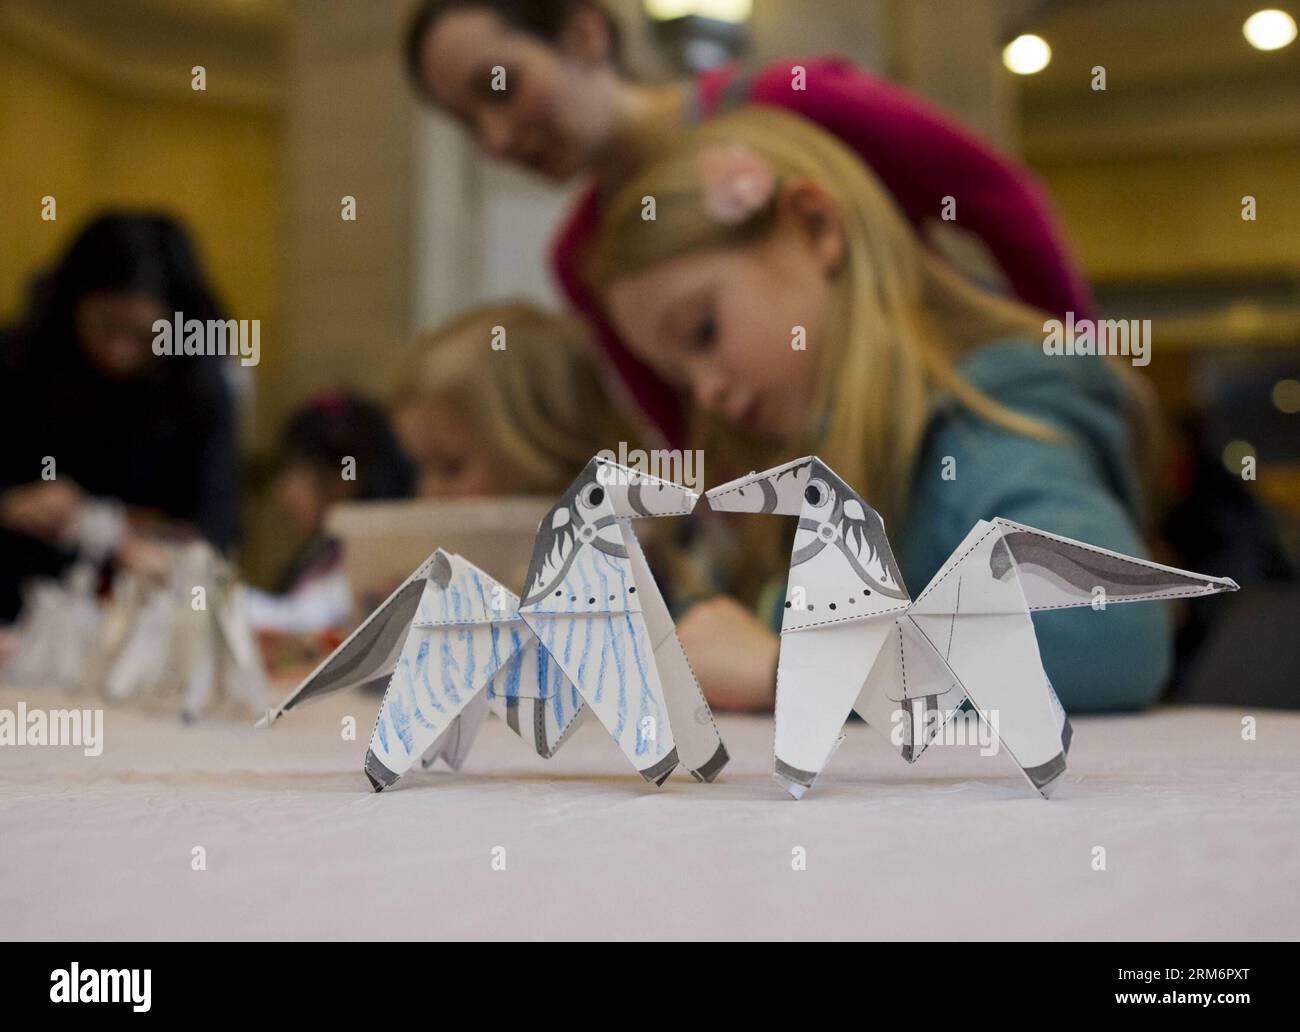 Kids learn to fold paper horse during the 2014 Chinese New Year Extravaganza at the Royal Ontario Museum in Toronto, Canada, Jan. 25, 2014. The event provided an opportunity for Canadians to learn about Chinese culture while celebrating the coming Lunar New Year of the Horse, which begins on Jan. 31. (Xinhua/Zou Zheng) (hy) CANADA-TORONTO-CHINESE NEW YEAR PUBLICATIONxNOTxINxCHN   Kids Learn to Fold Paper Horse during The 2014 Chinese New Year  AT The Royal Ontario Museum in Toronto Canada Jan 25 2014 The Event provided to Opportunity for Canadians to Learn About Chinese Culture while Celebrati Stock Photo